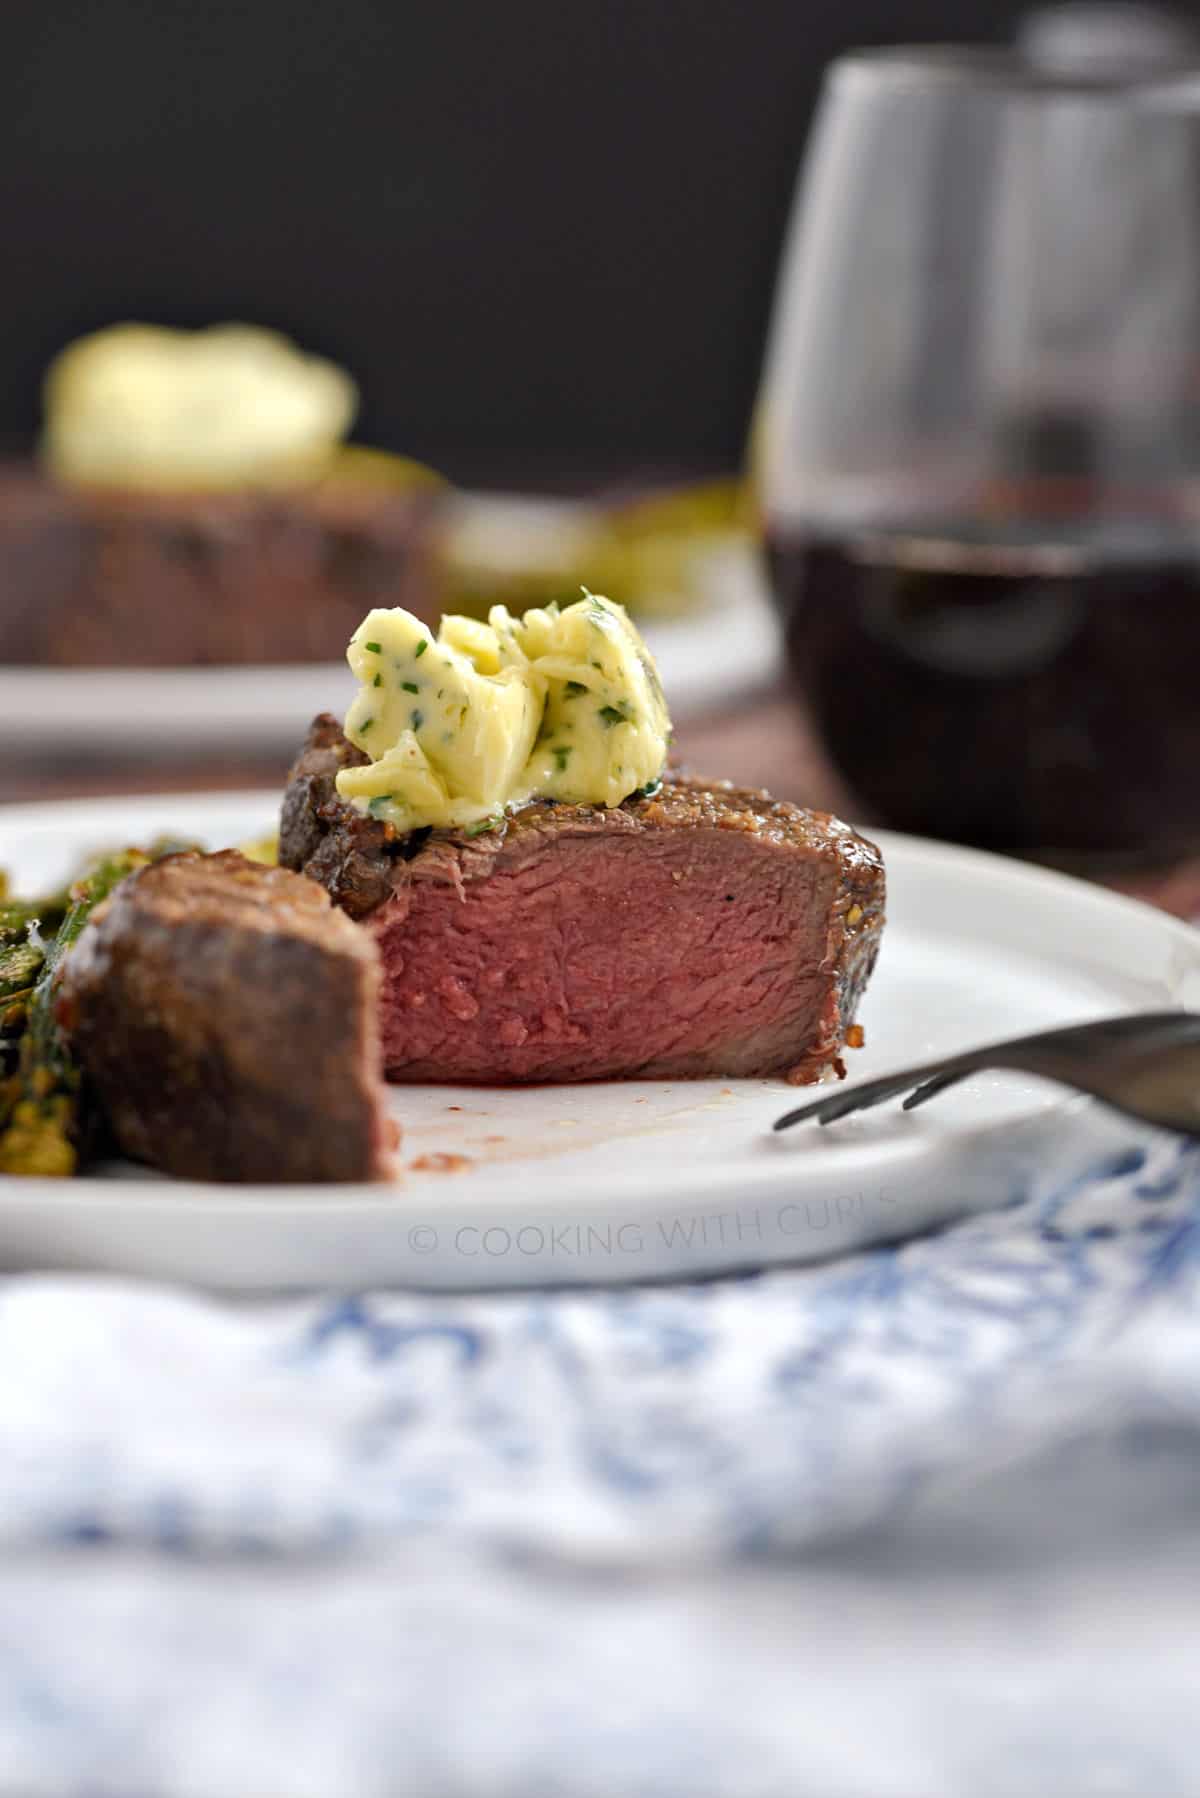 A filet mignon cut in half to show the pink center topped with herb butter on a white plate.